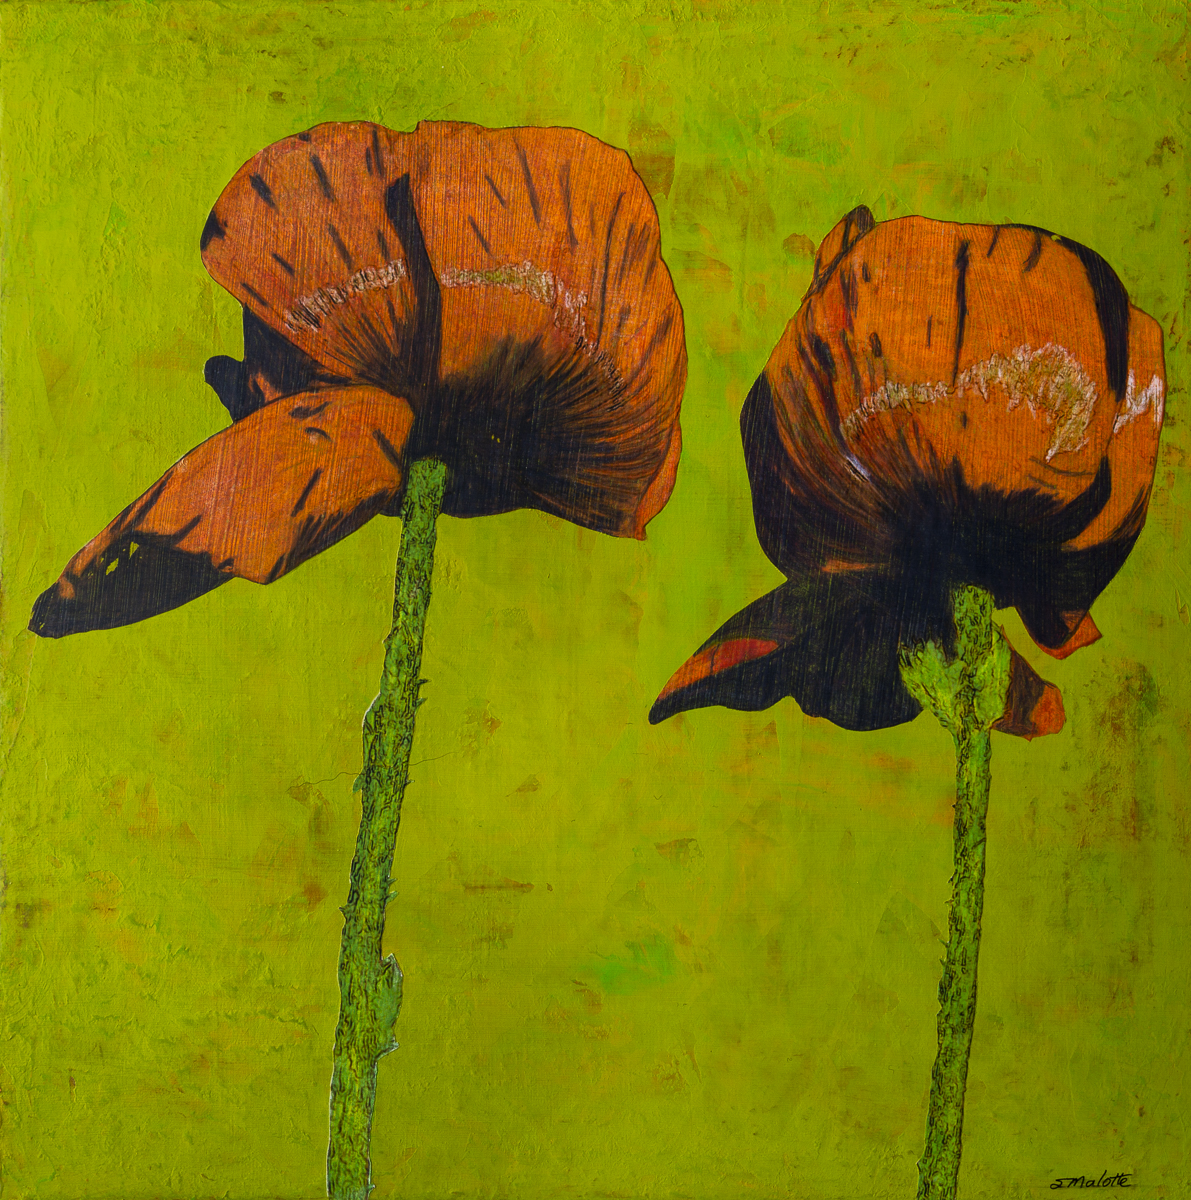 Poppies On Green